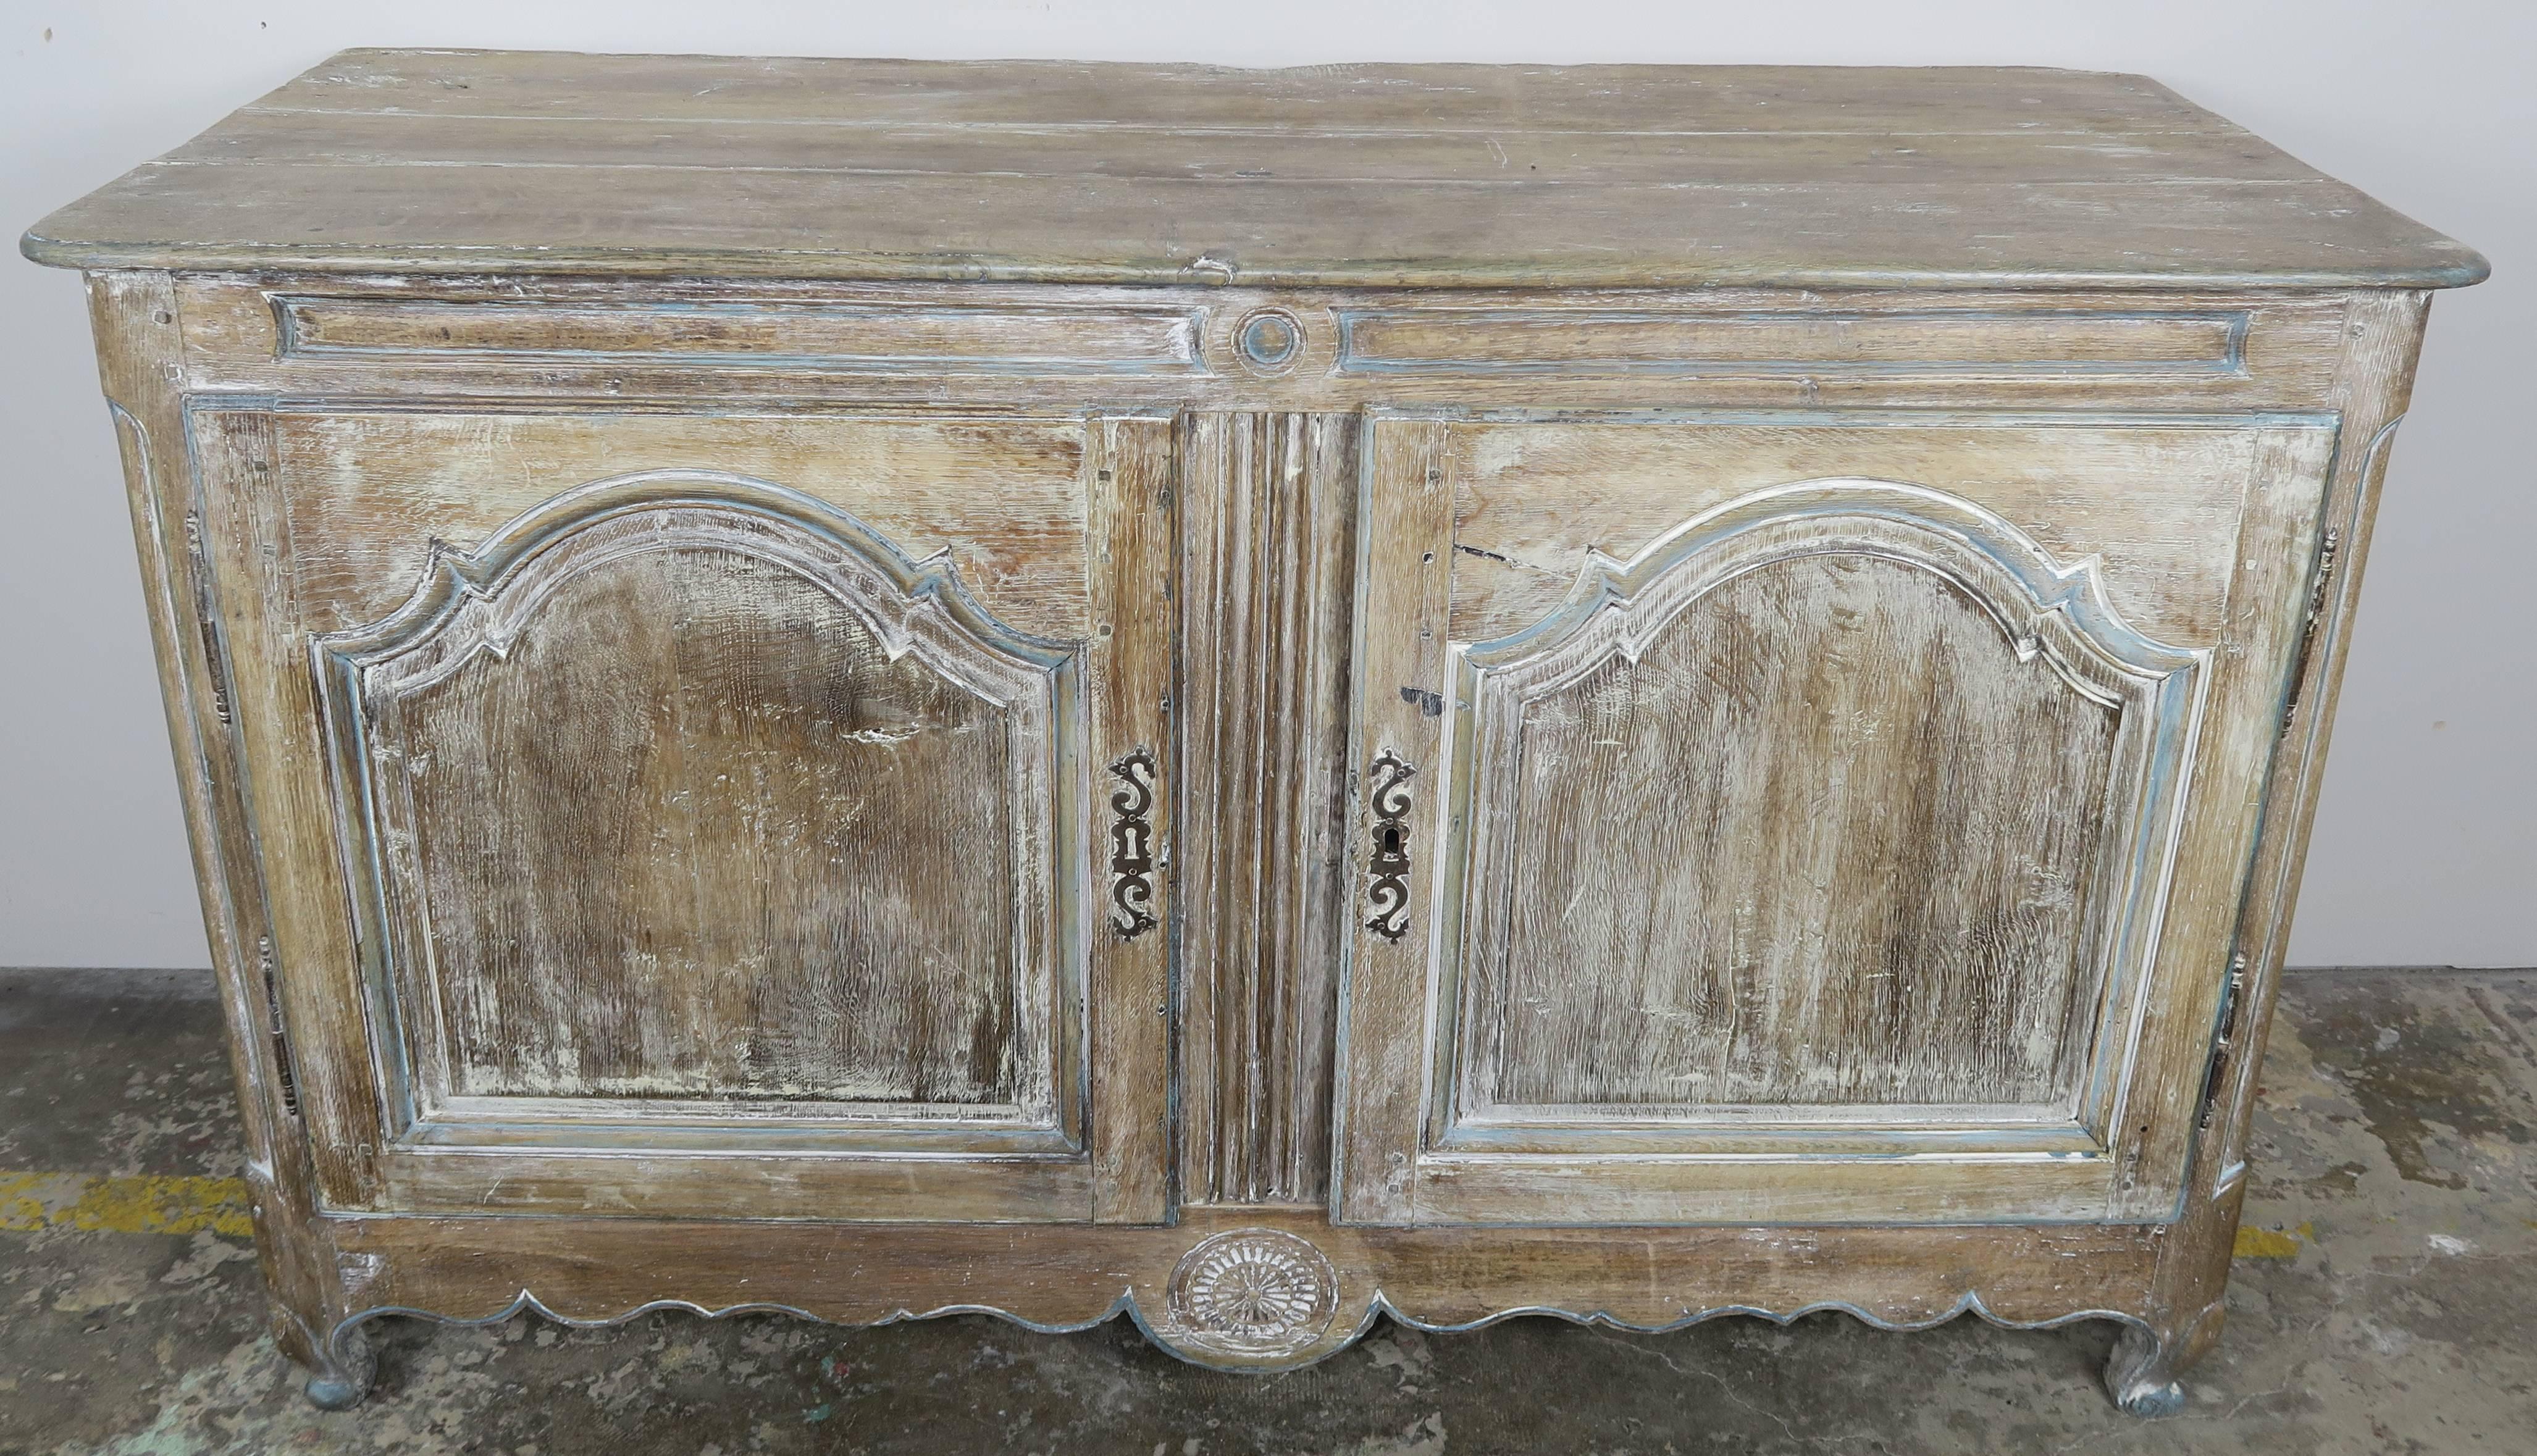 19th century French painted buffet with two doors. The piece stands on four cabriole legs with rams head feet. Beautiful worn finish with remnants of paint seen throughout.